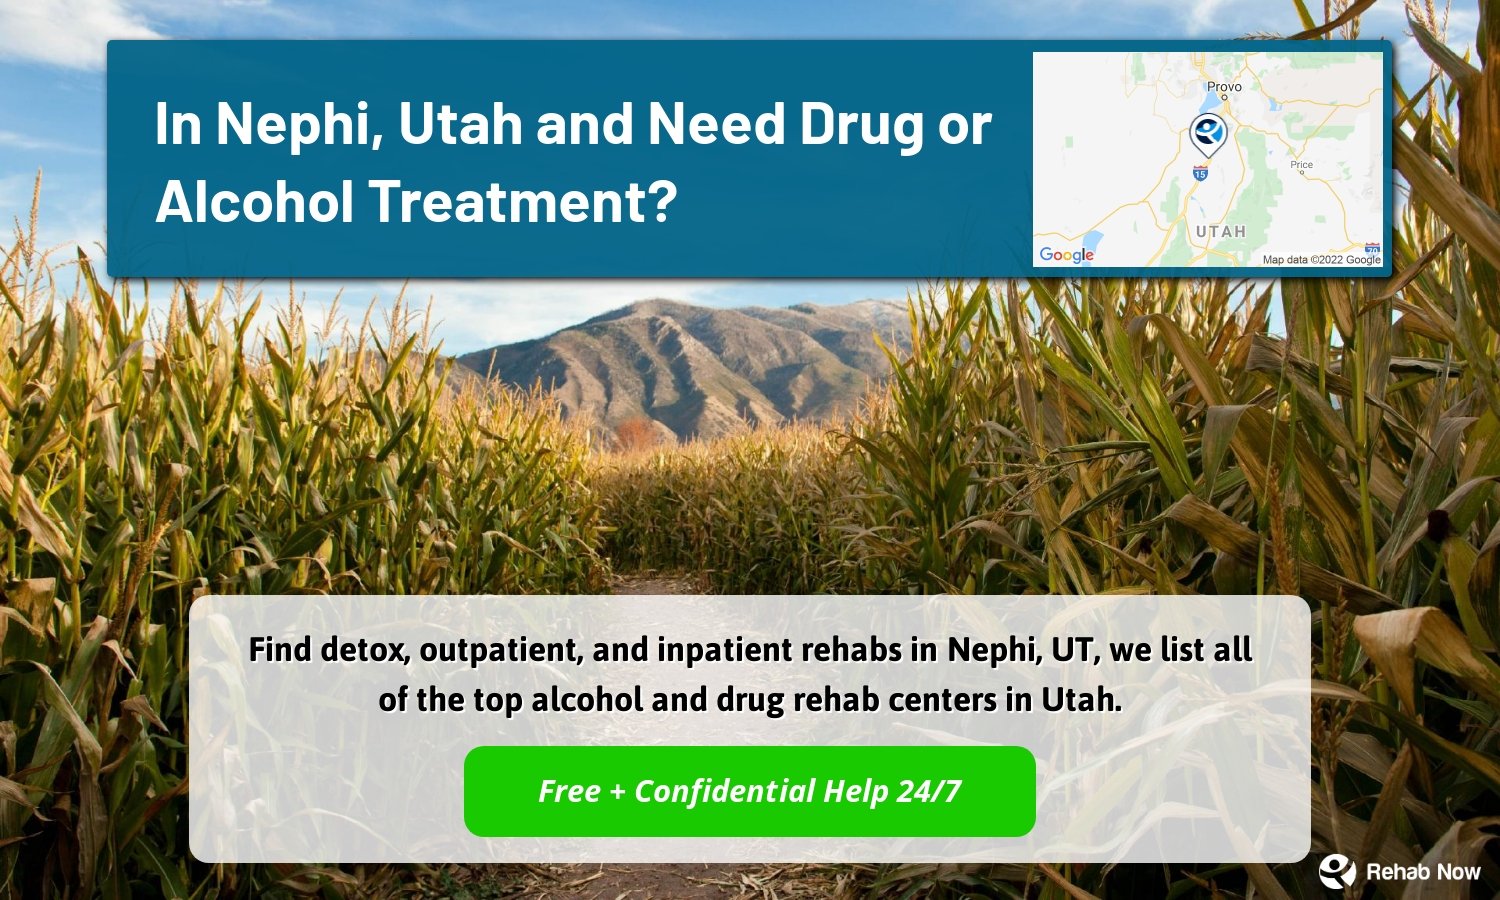 Find detox, outpatient, and inpatient rehabs in Nephi, UT, we list all of the top alcohol and drug rehab centers in Utah.